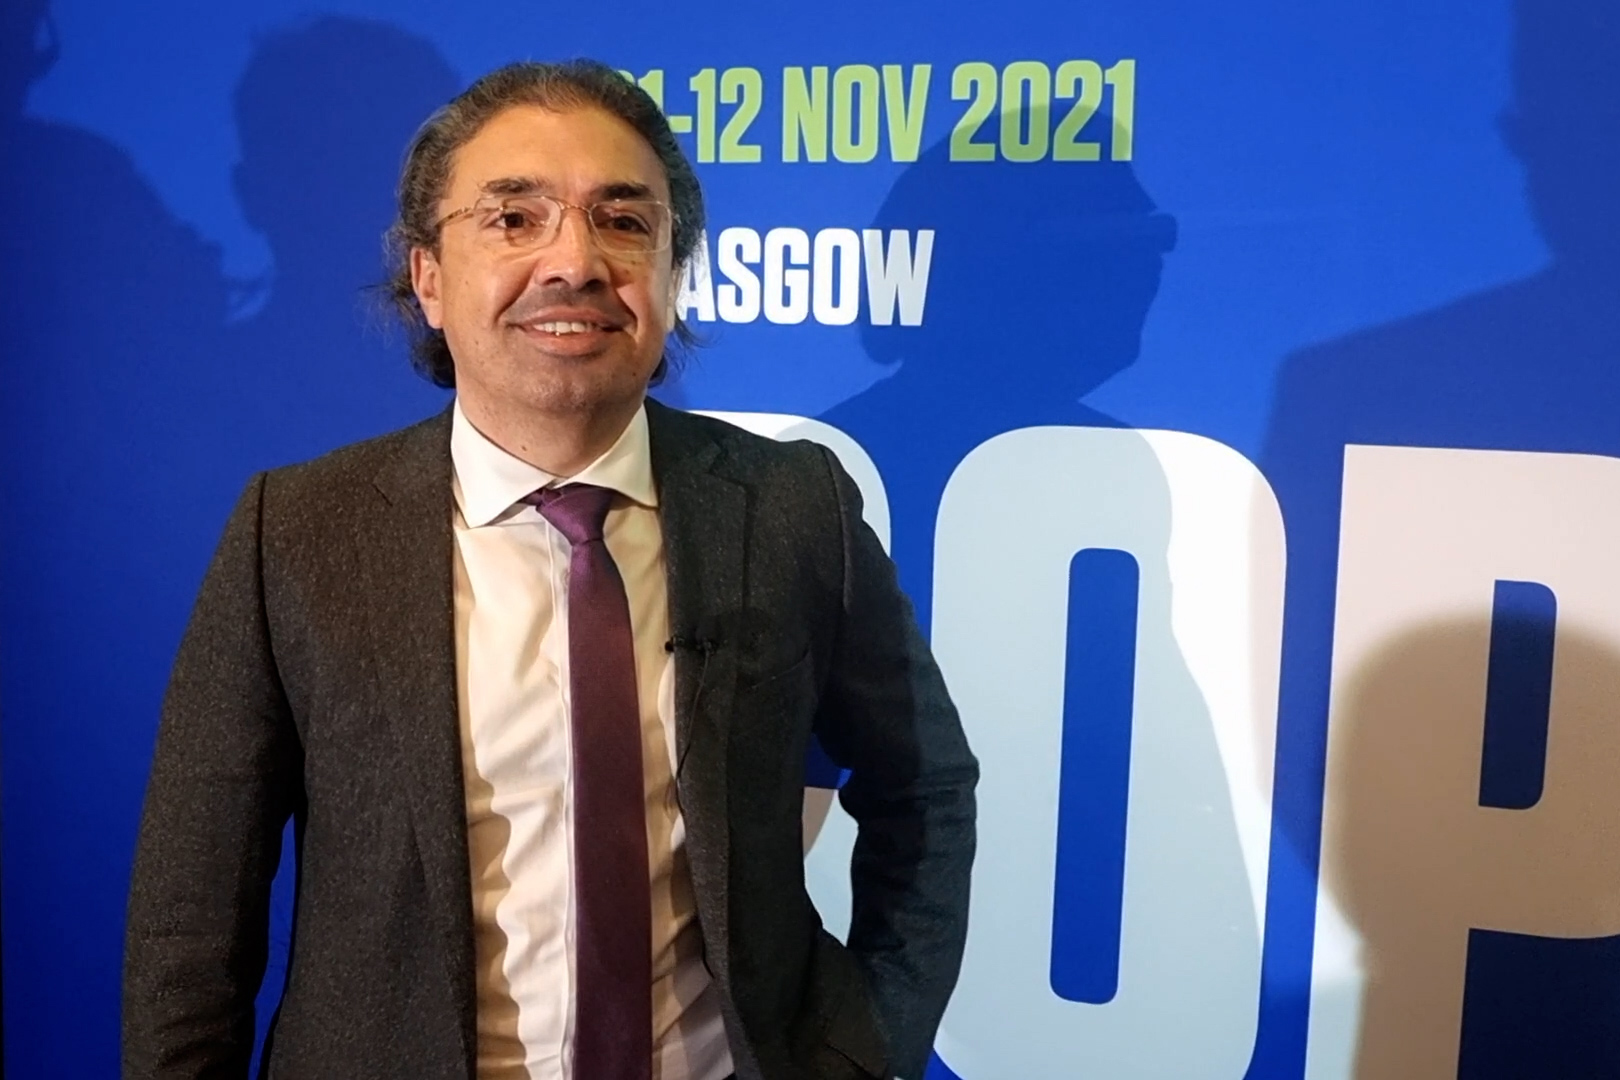 Ahmed at COP26, Glasgow.